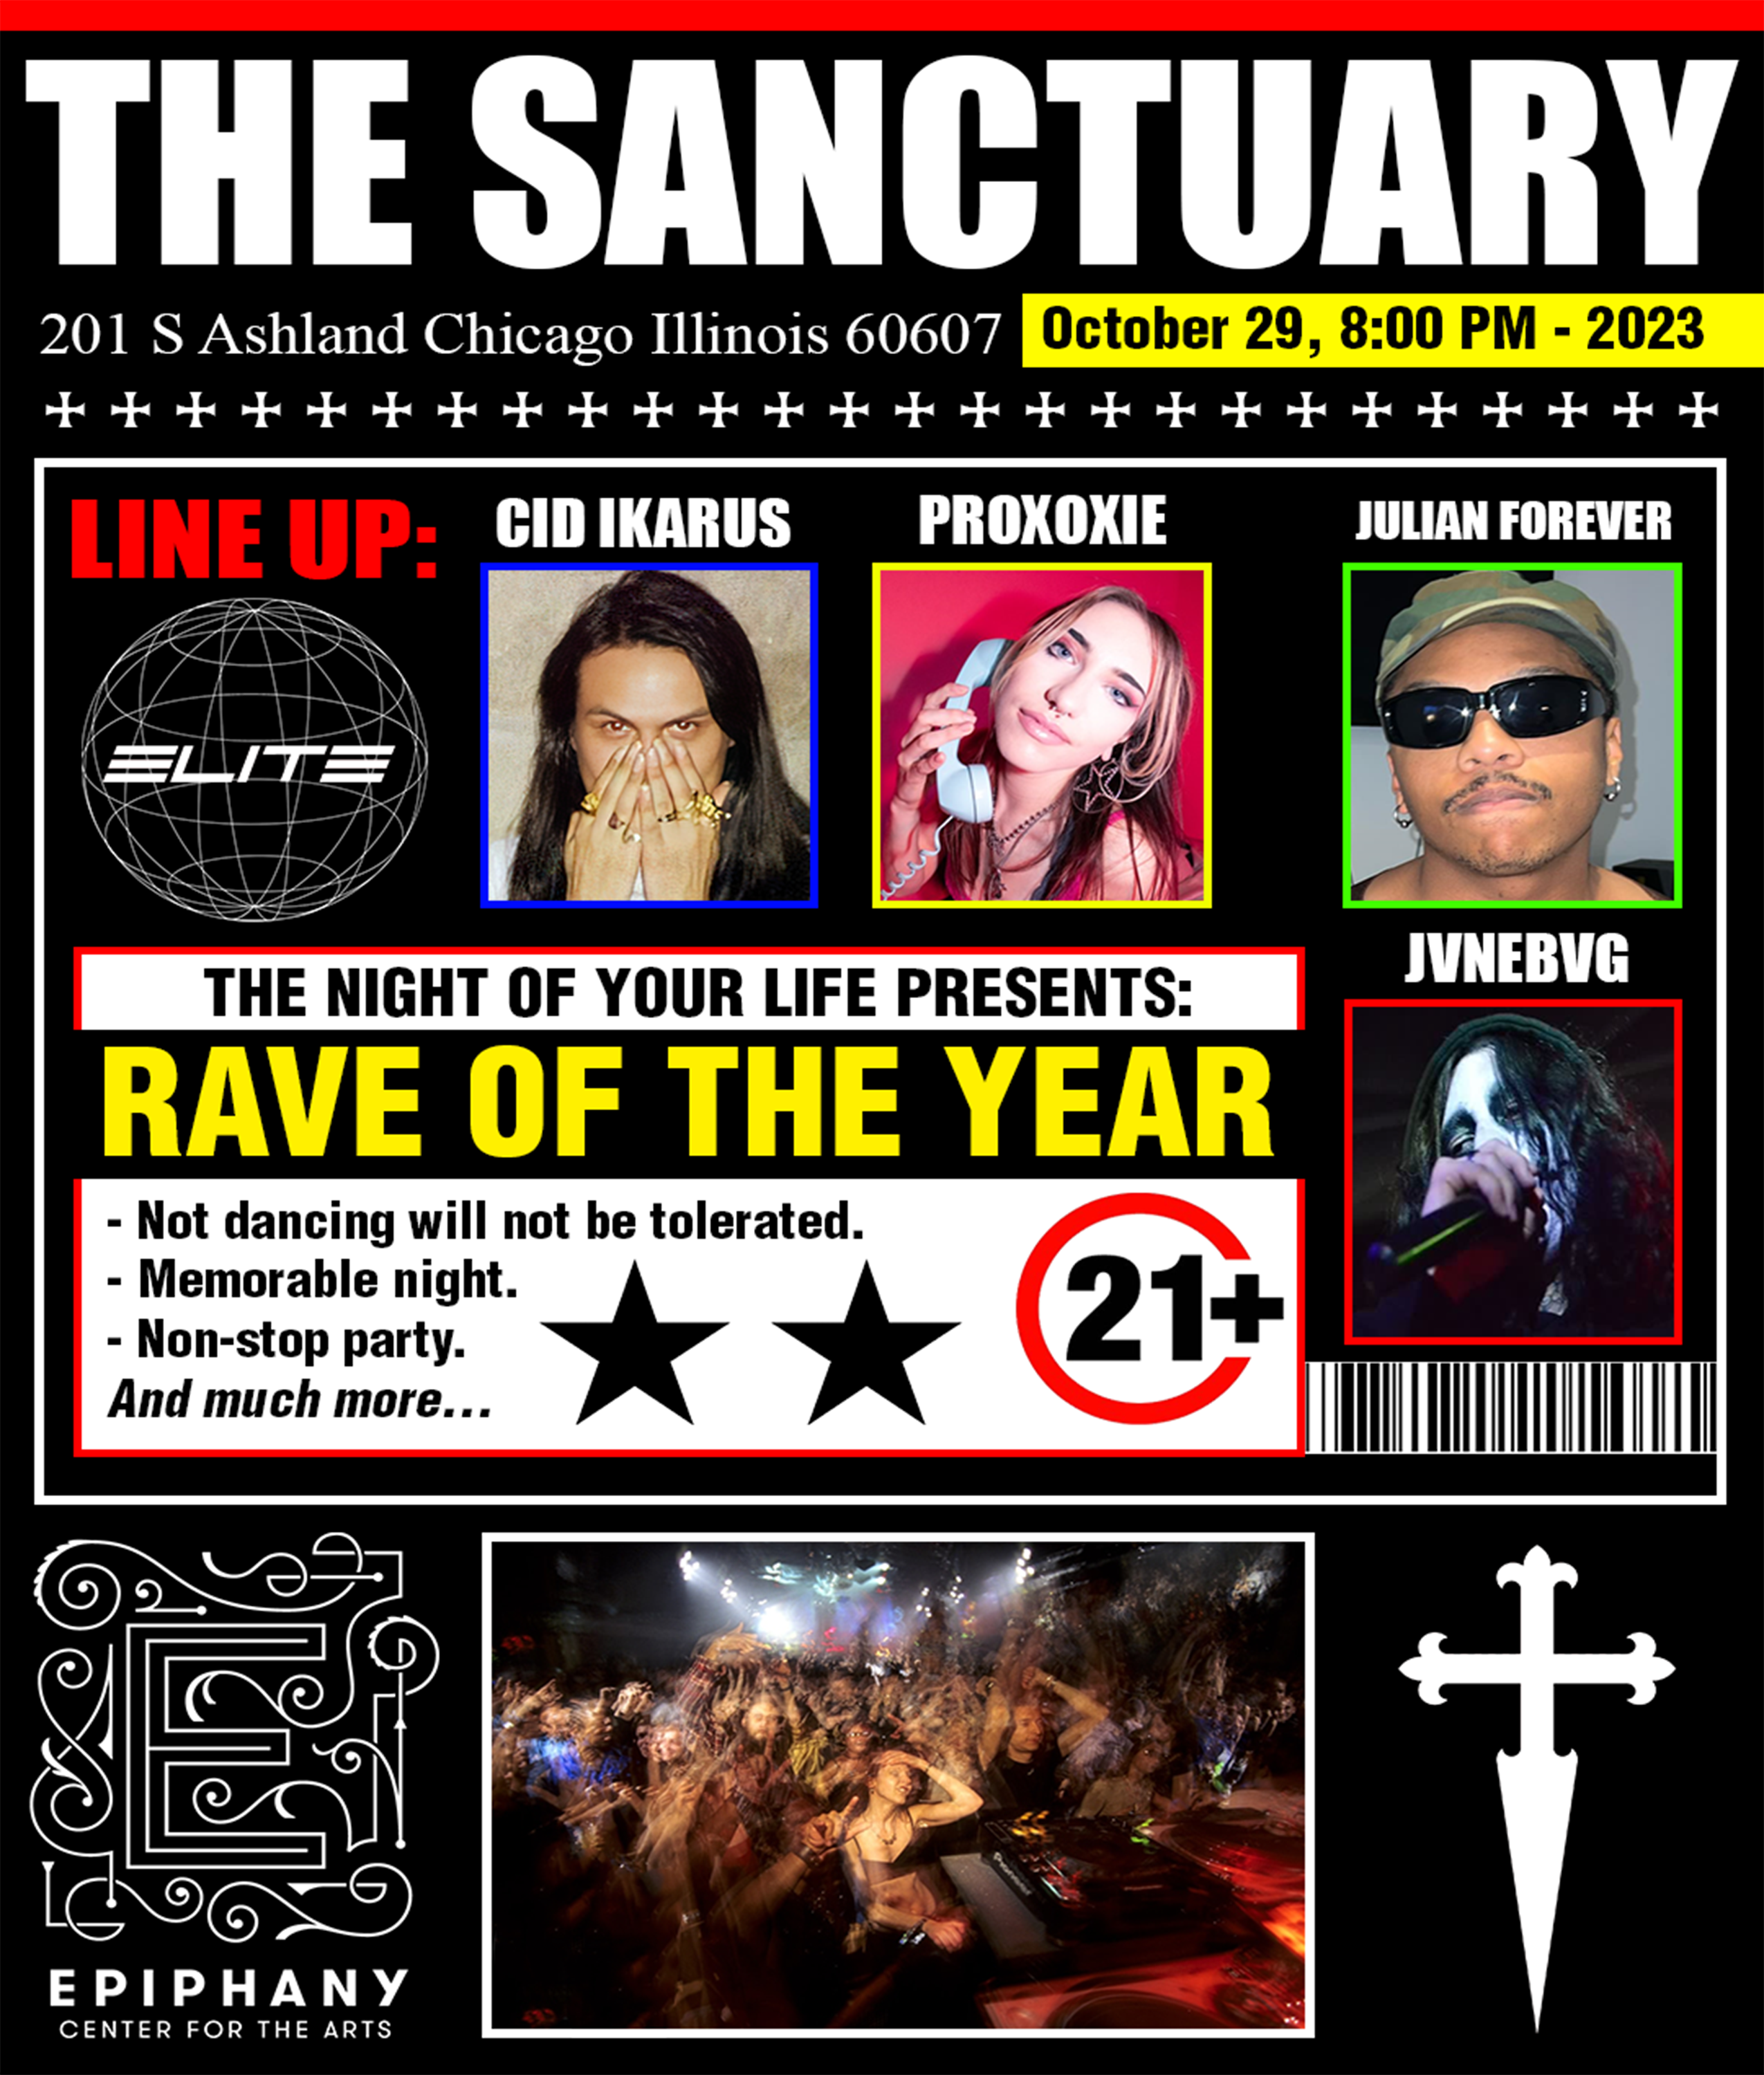 PROXOXIE, CID IKARUS, JVNEBVG, JULIAN FOREVER; Rave of the Year - フライヤー裏